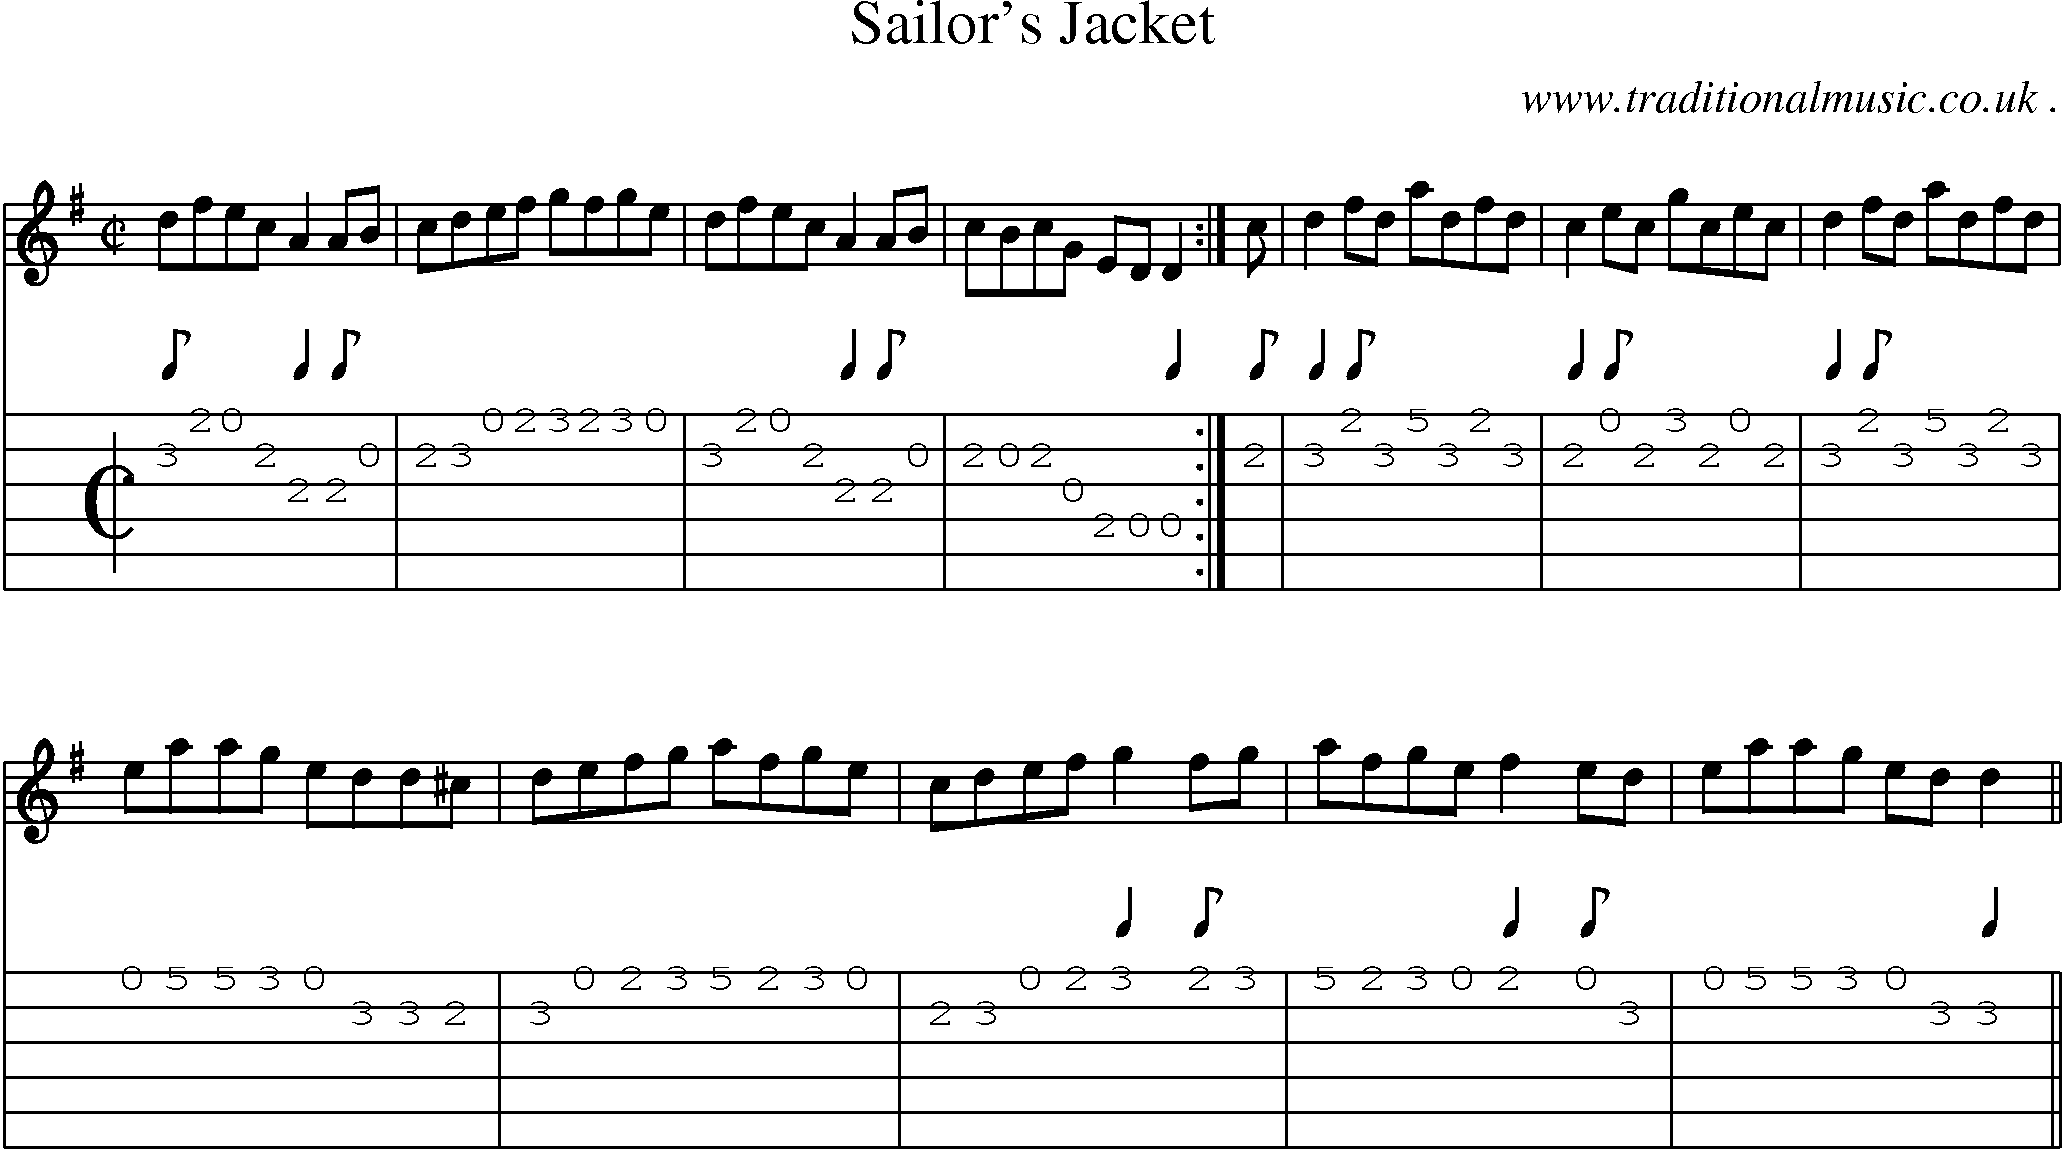 Sheet-Music and Guitar Tabs for Sailors Jacket